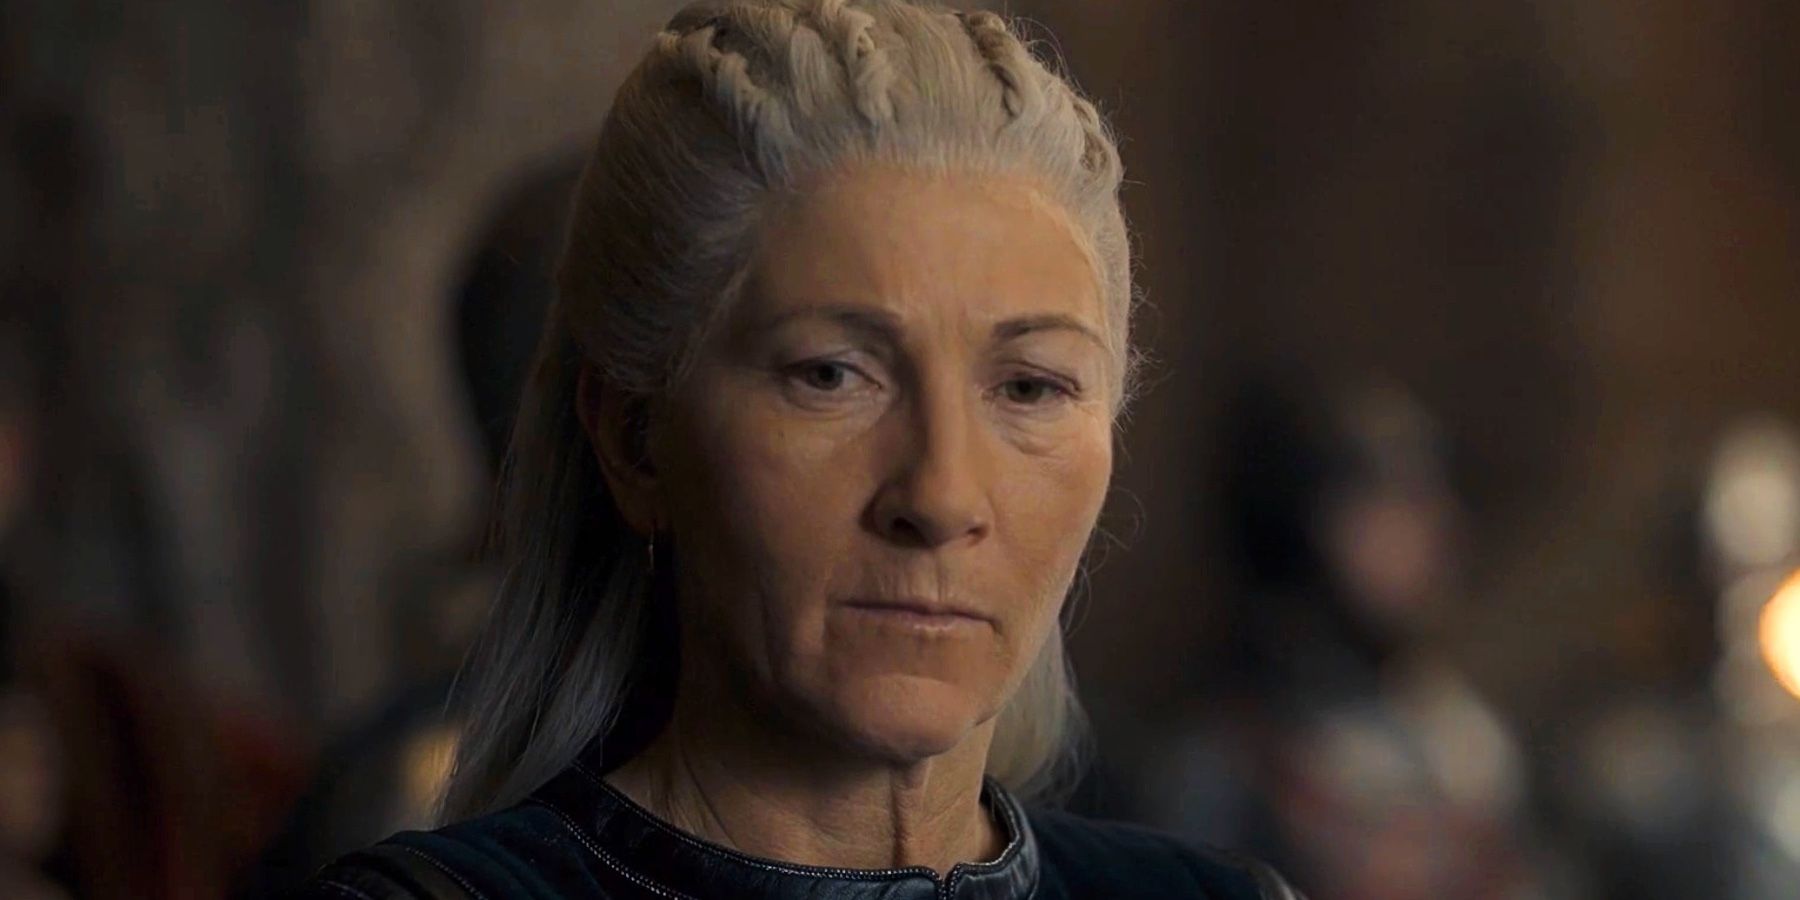 Rhaenys looking haunted in House Of The Dragon 